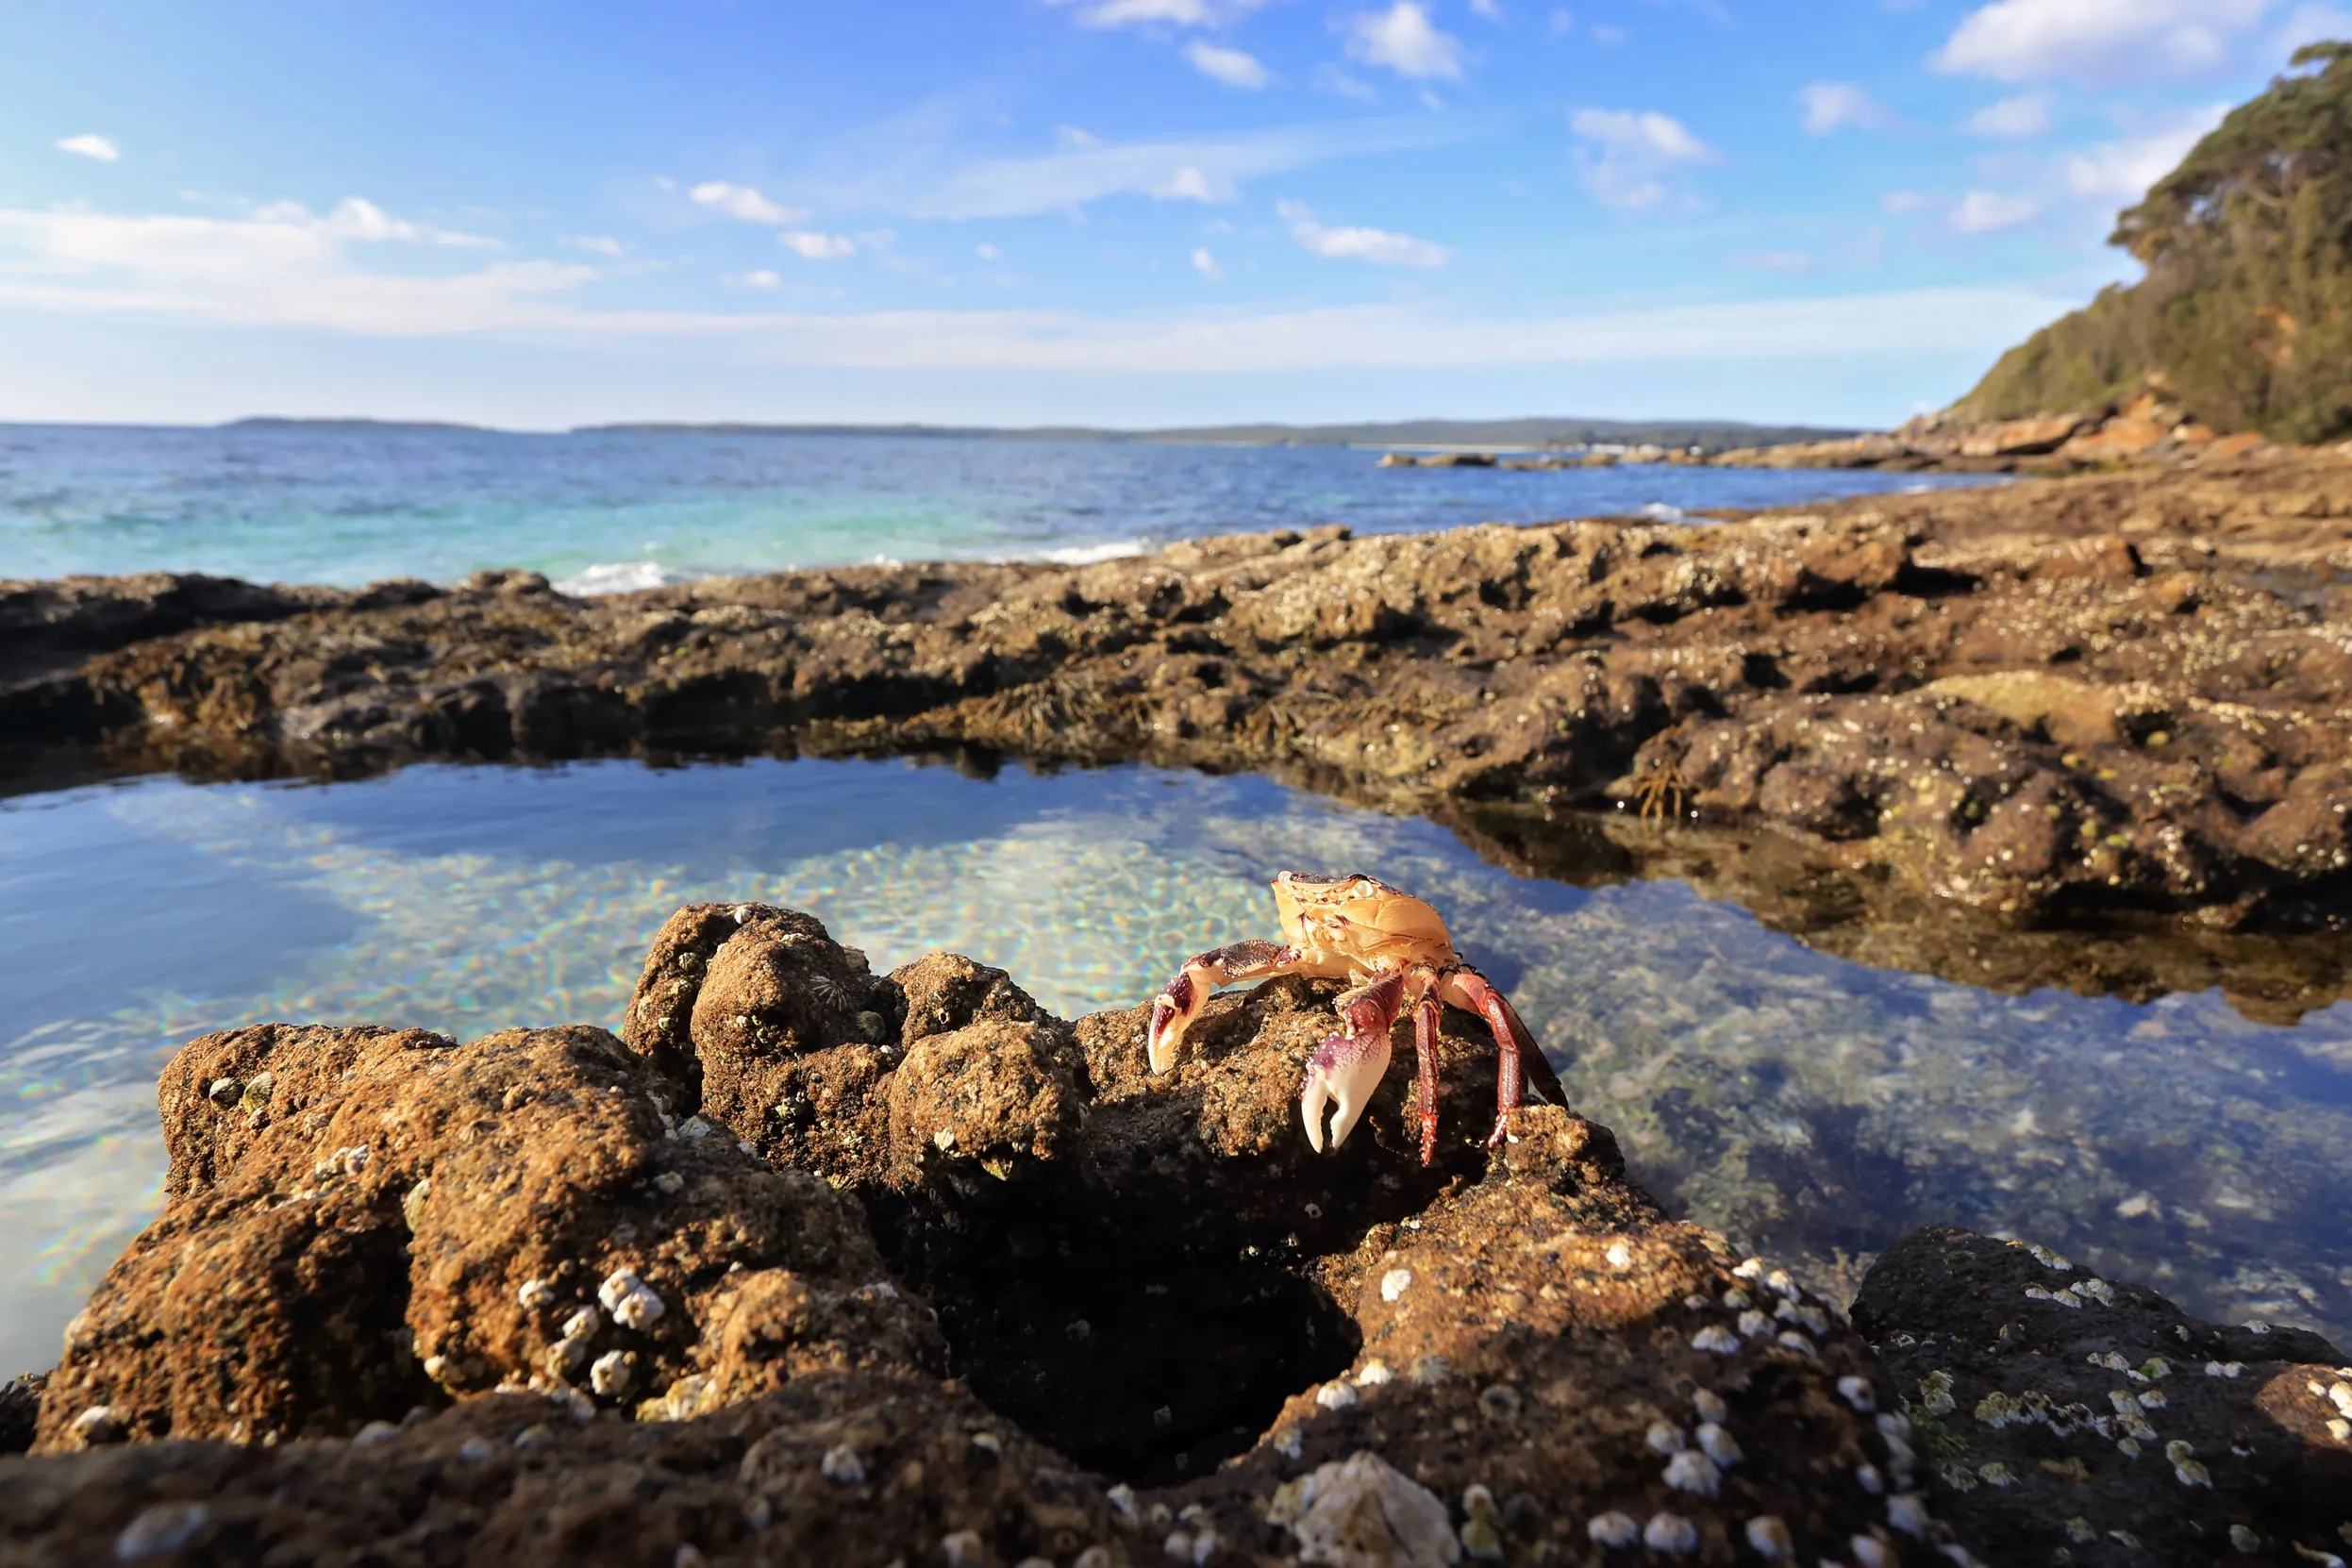 A pink and orange crab perched on a jagged brown rock, which extends down into a rockpool behind.